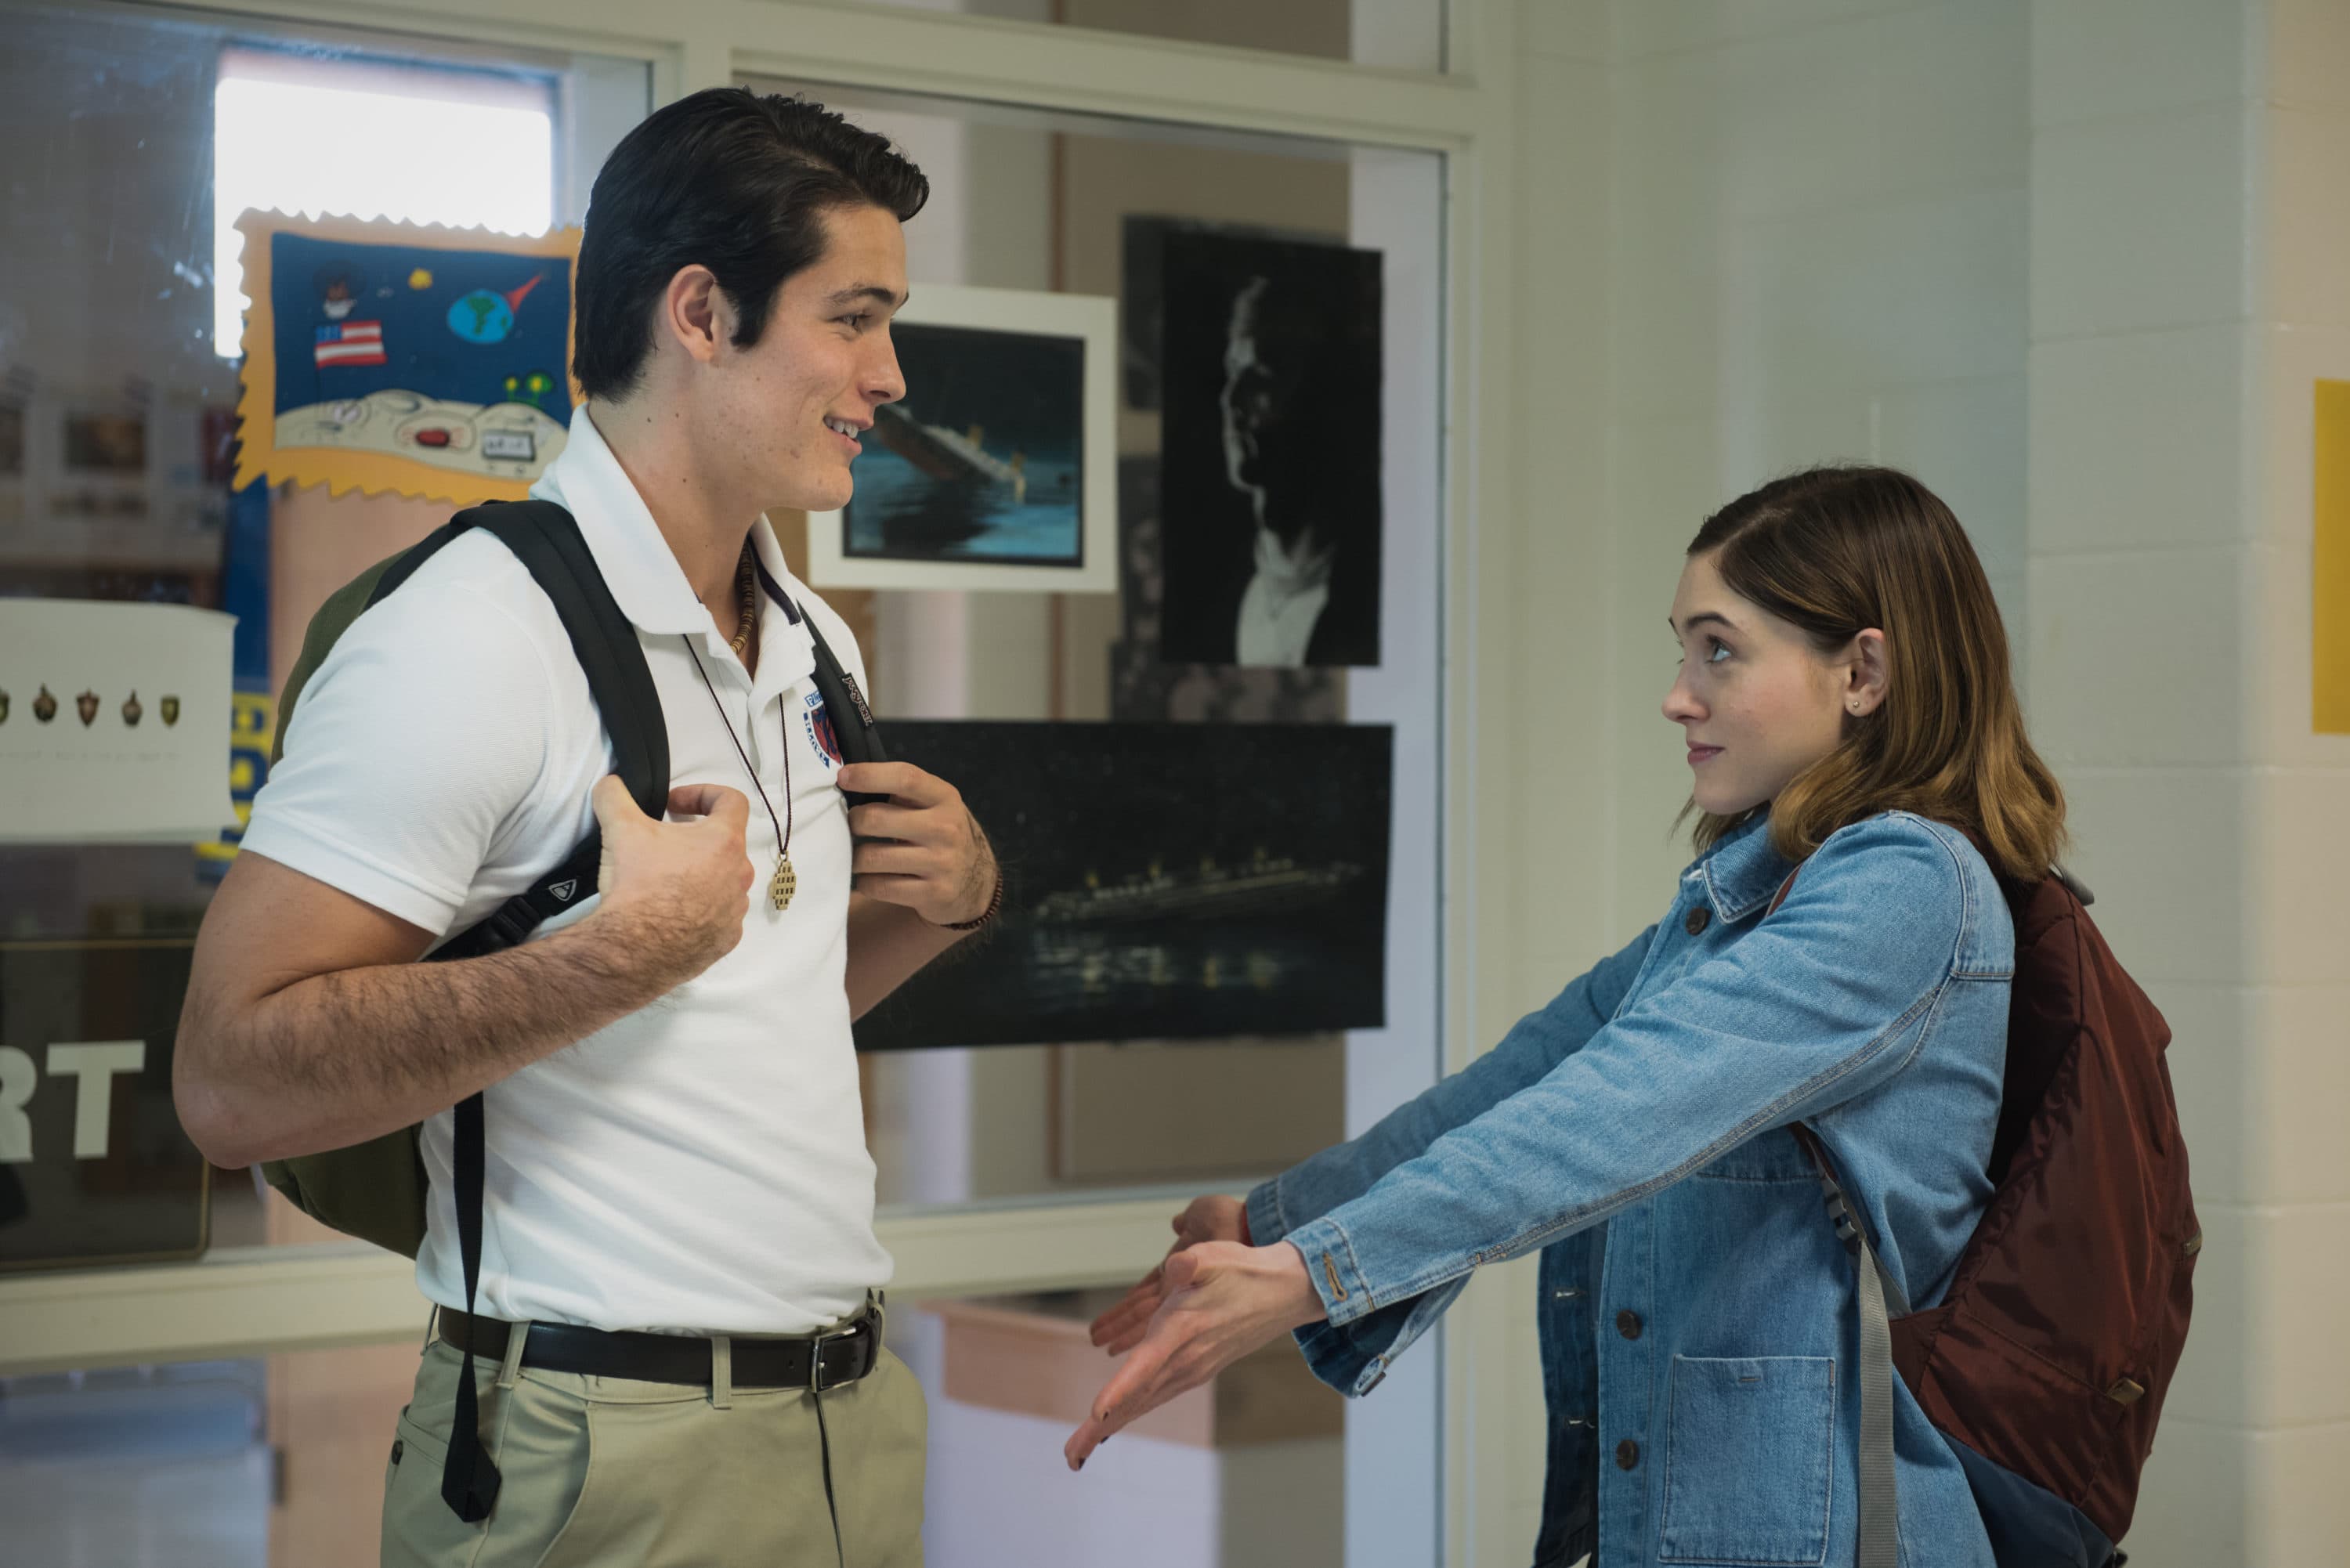 Naughtyamerica Schoolgirl - Funny And Sweet, Coming-Of-Age Film 'Yes, God, Yes' Follows A Catholic  Schoolgirl Making Sense Of Her Sexuality | WBUR News